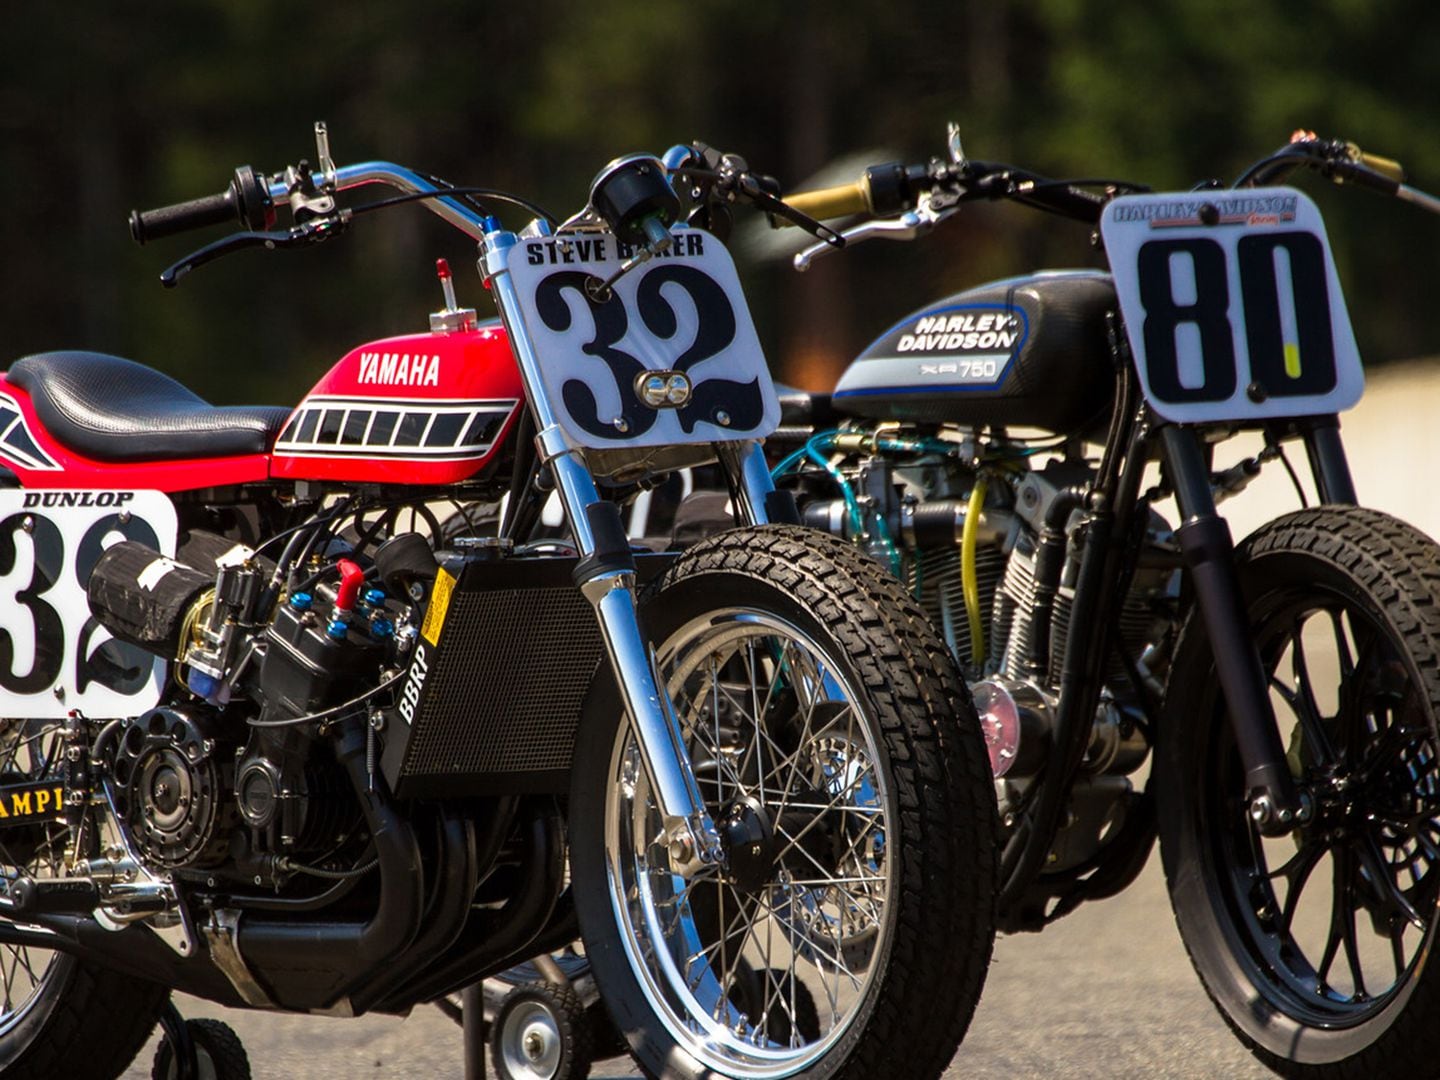 This scary TZ750 flat track racer is also street legal